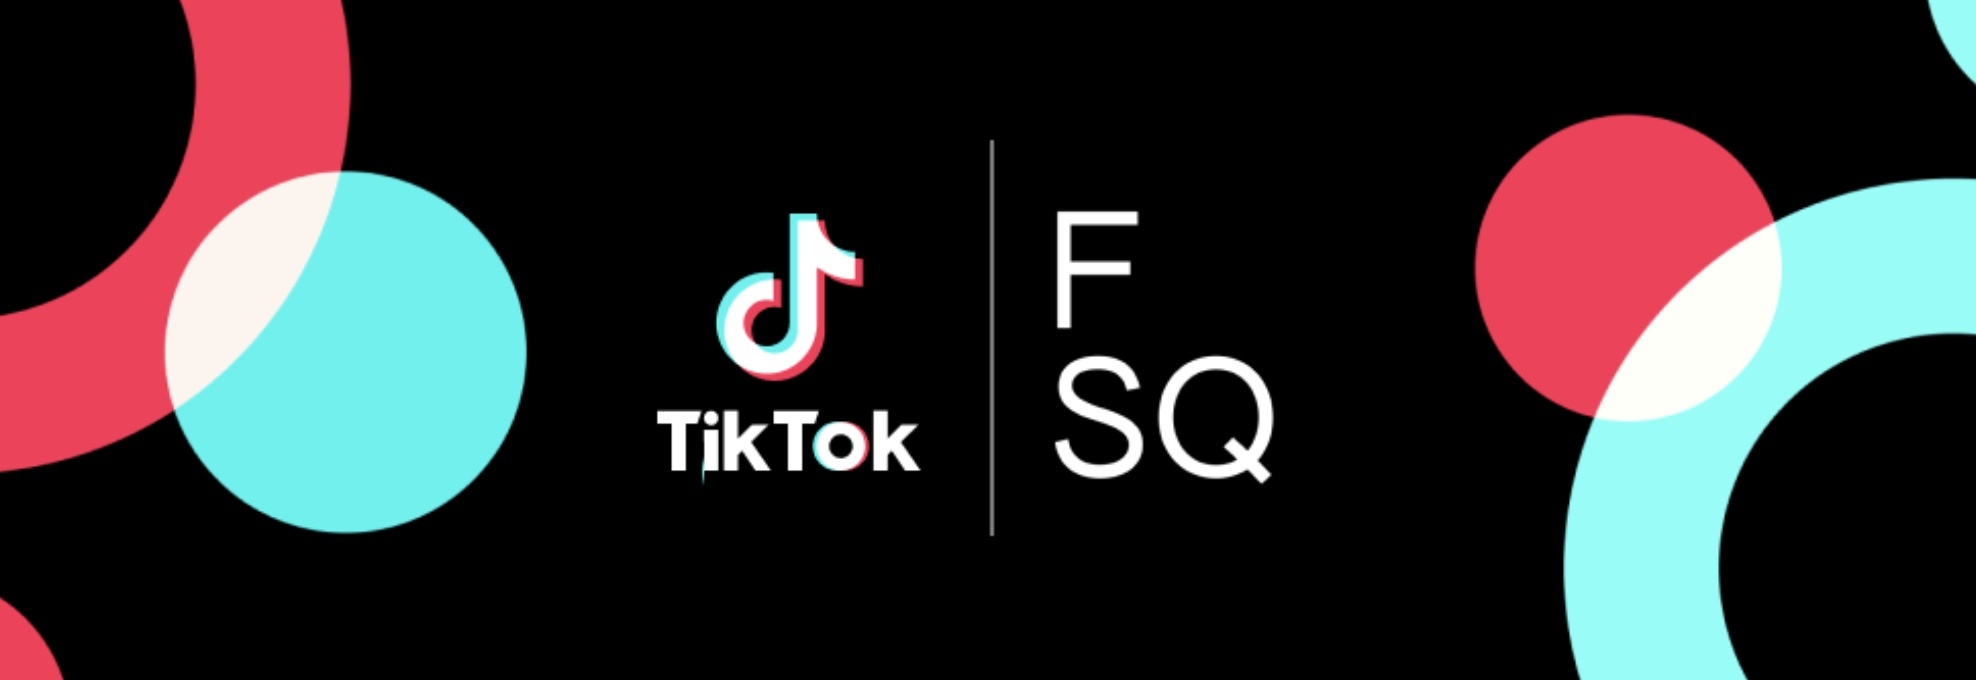 TikTok adds Foursquare measurement tool for eCommerce advertisers